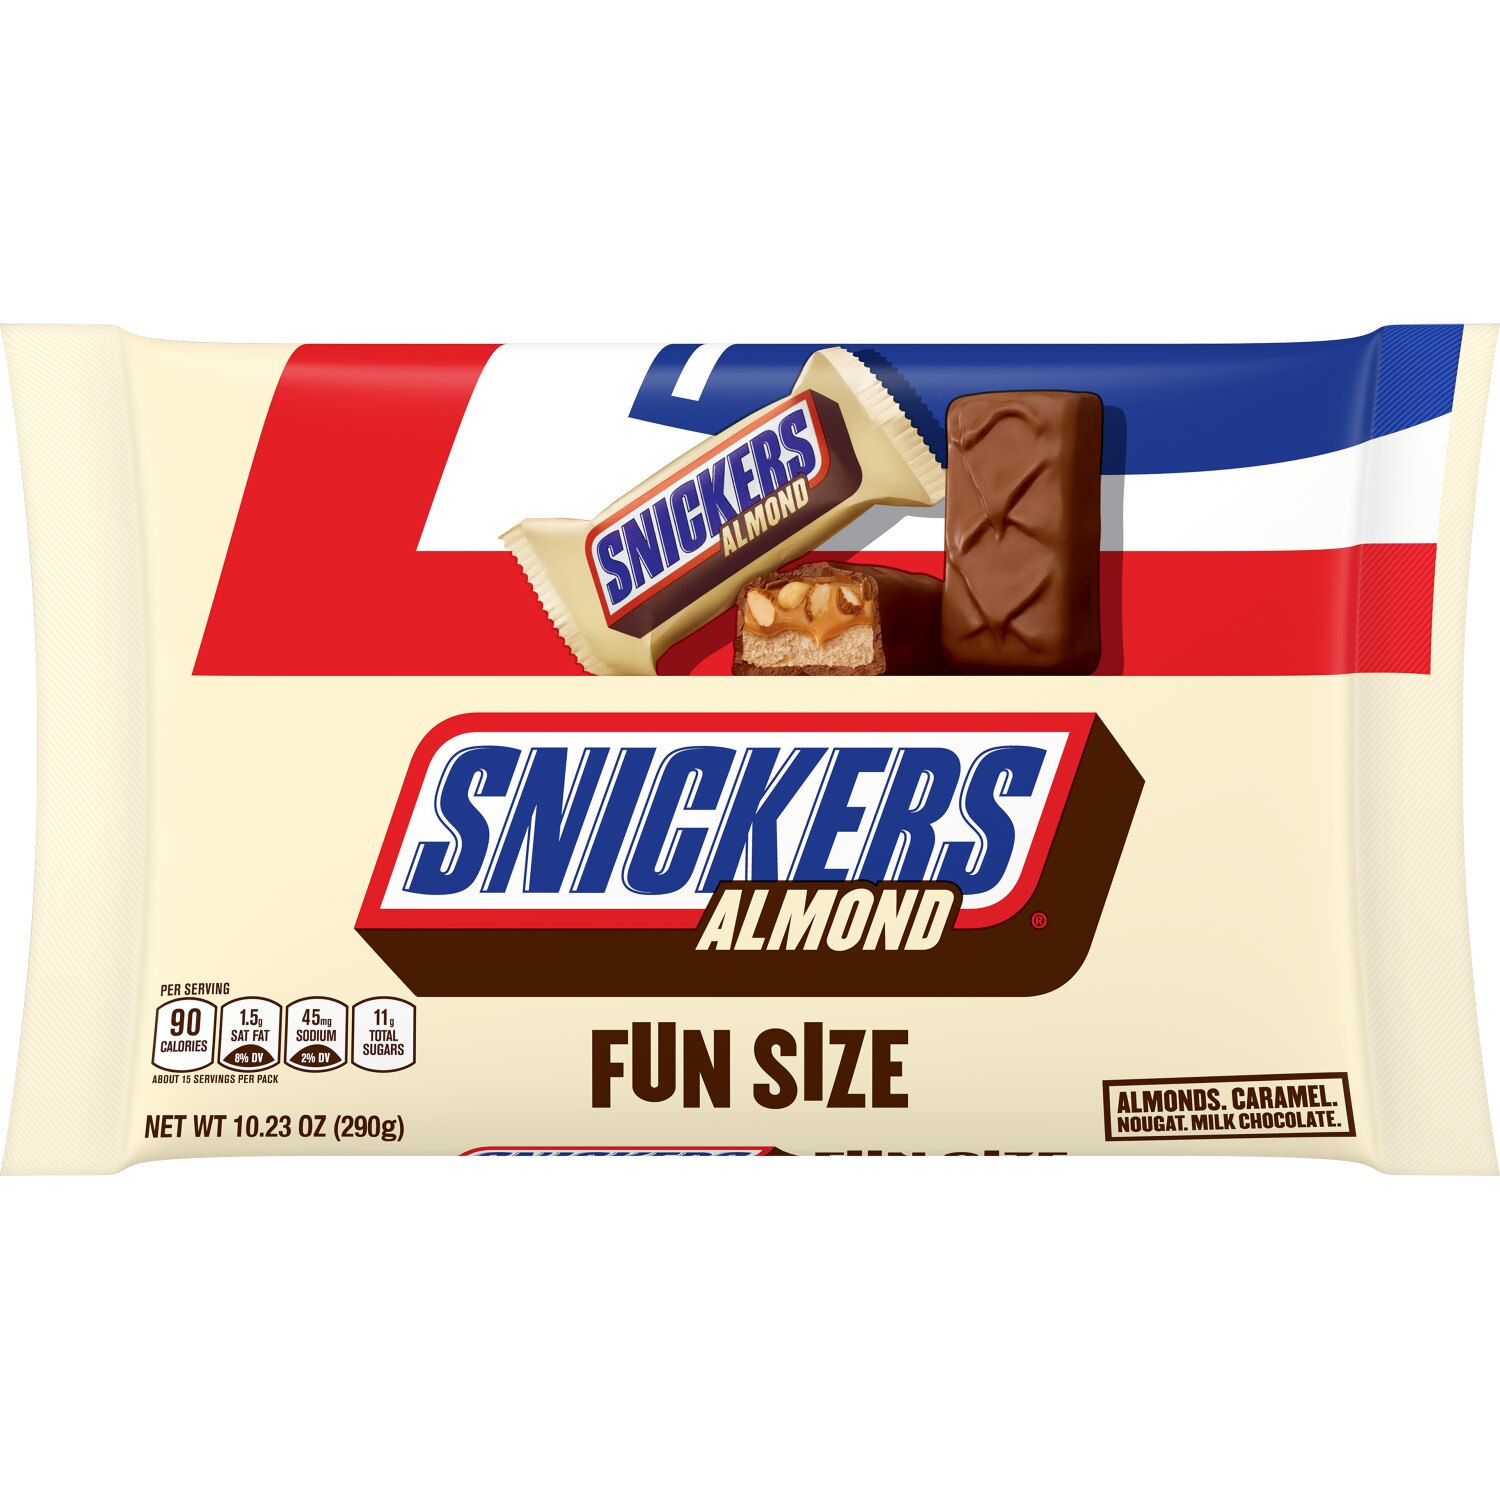 Snickers Almond Chocolate Candy Bars, 10.23 oz